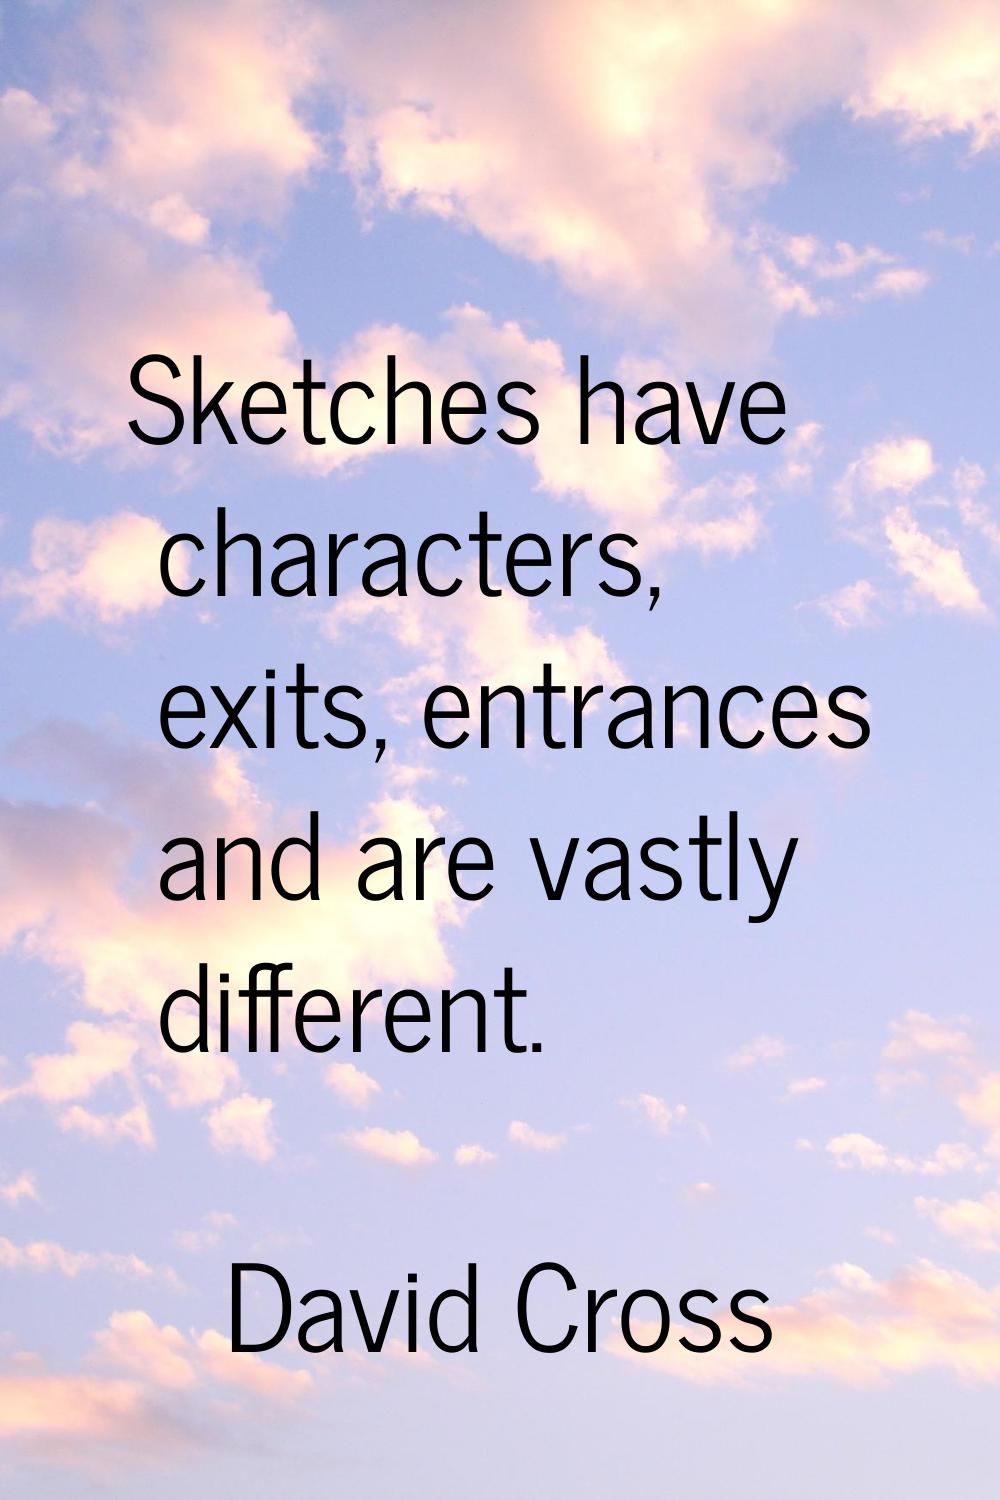 Sketches have characters, exits, entrances and are vastly different.